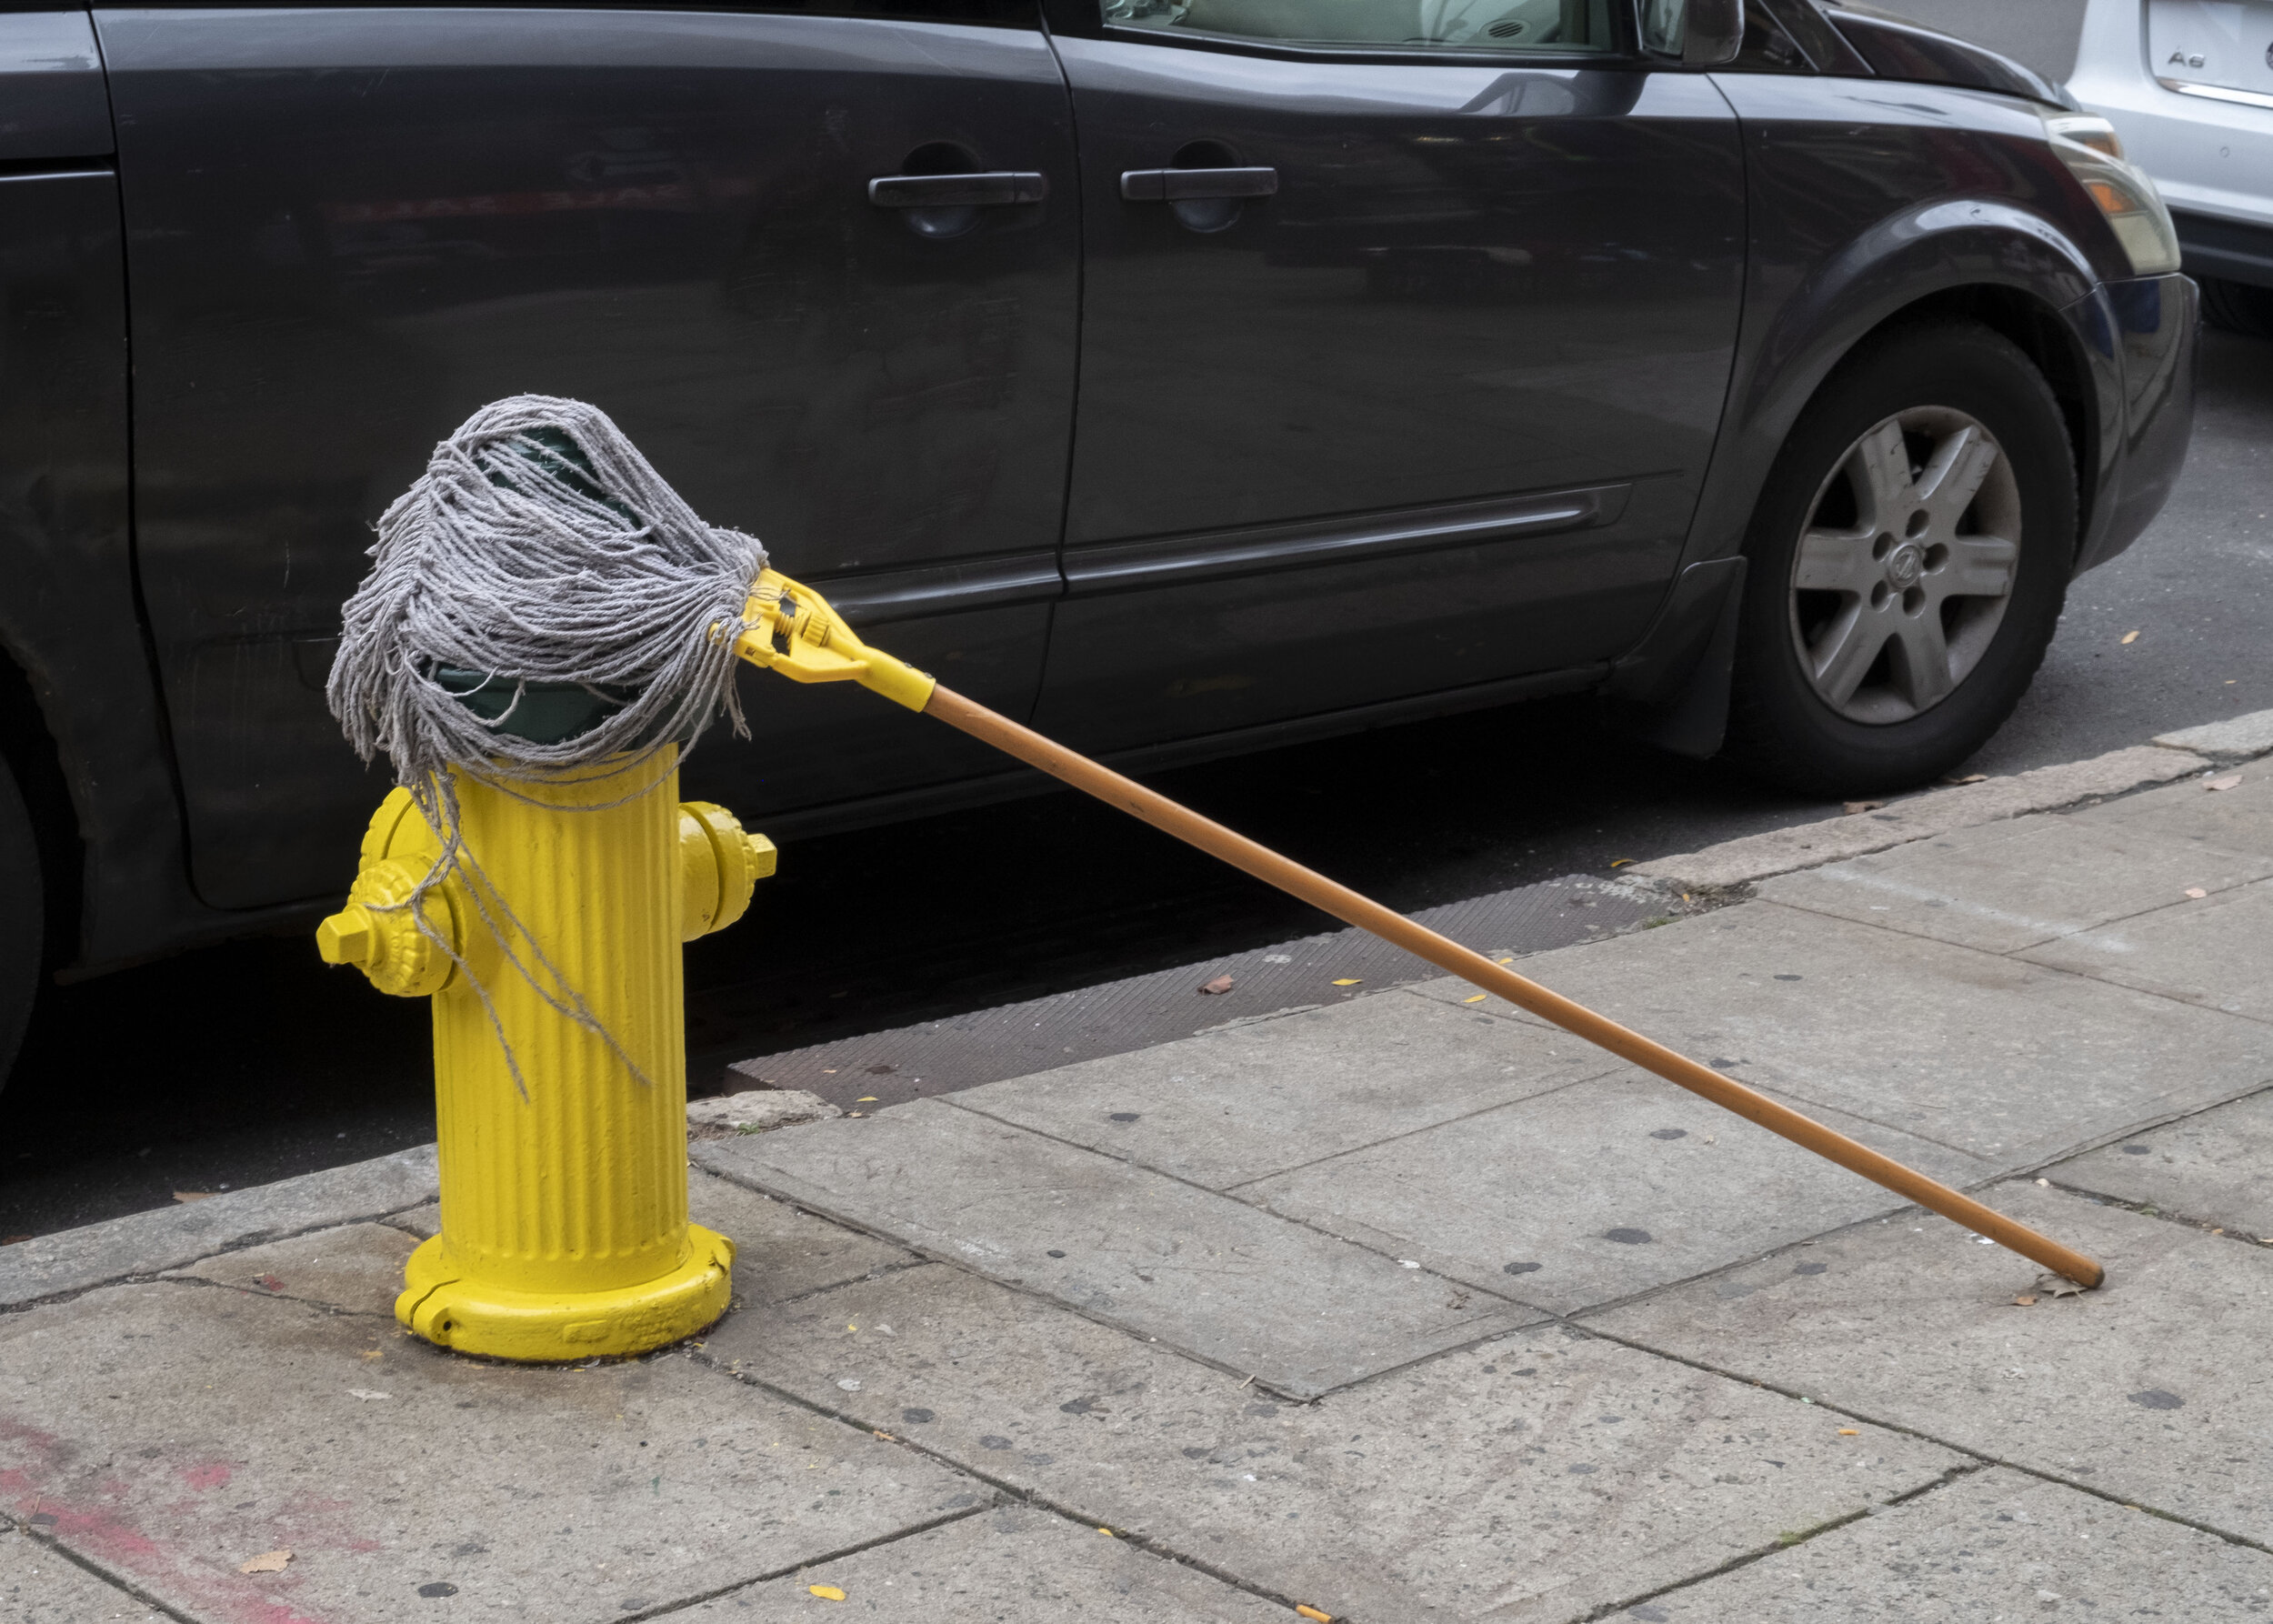 mop and hydrant.jpg